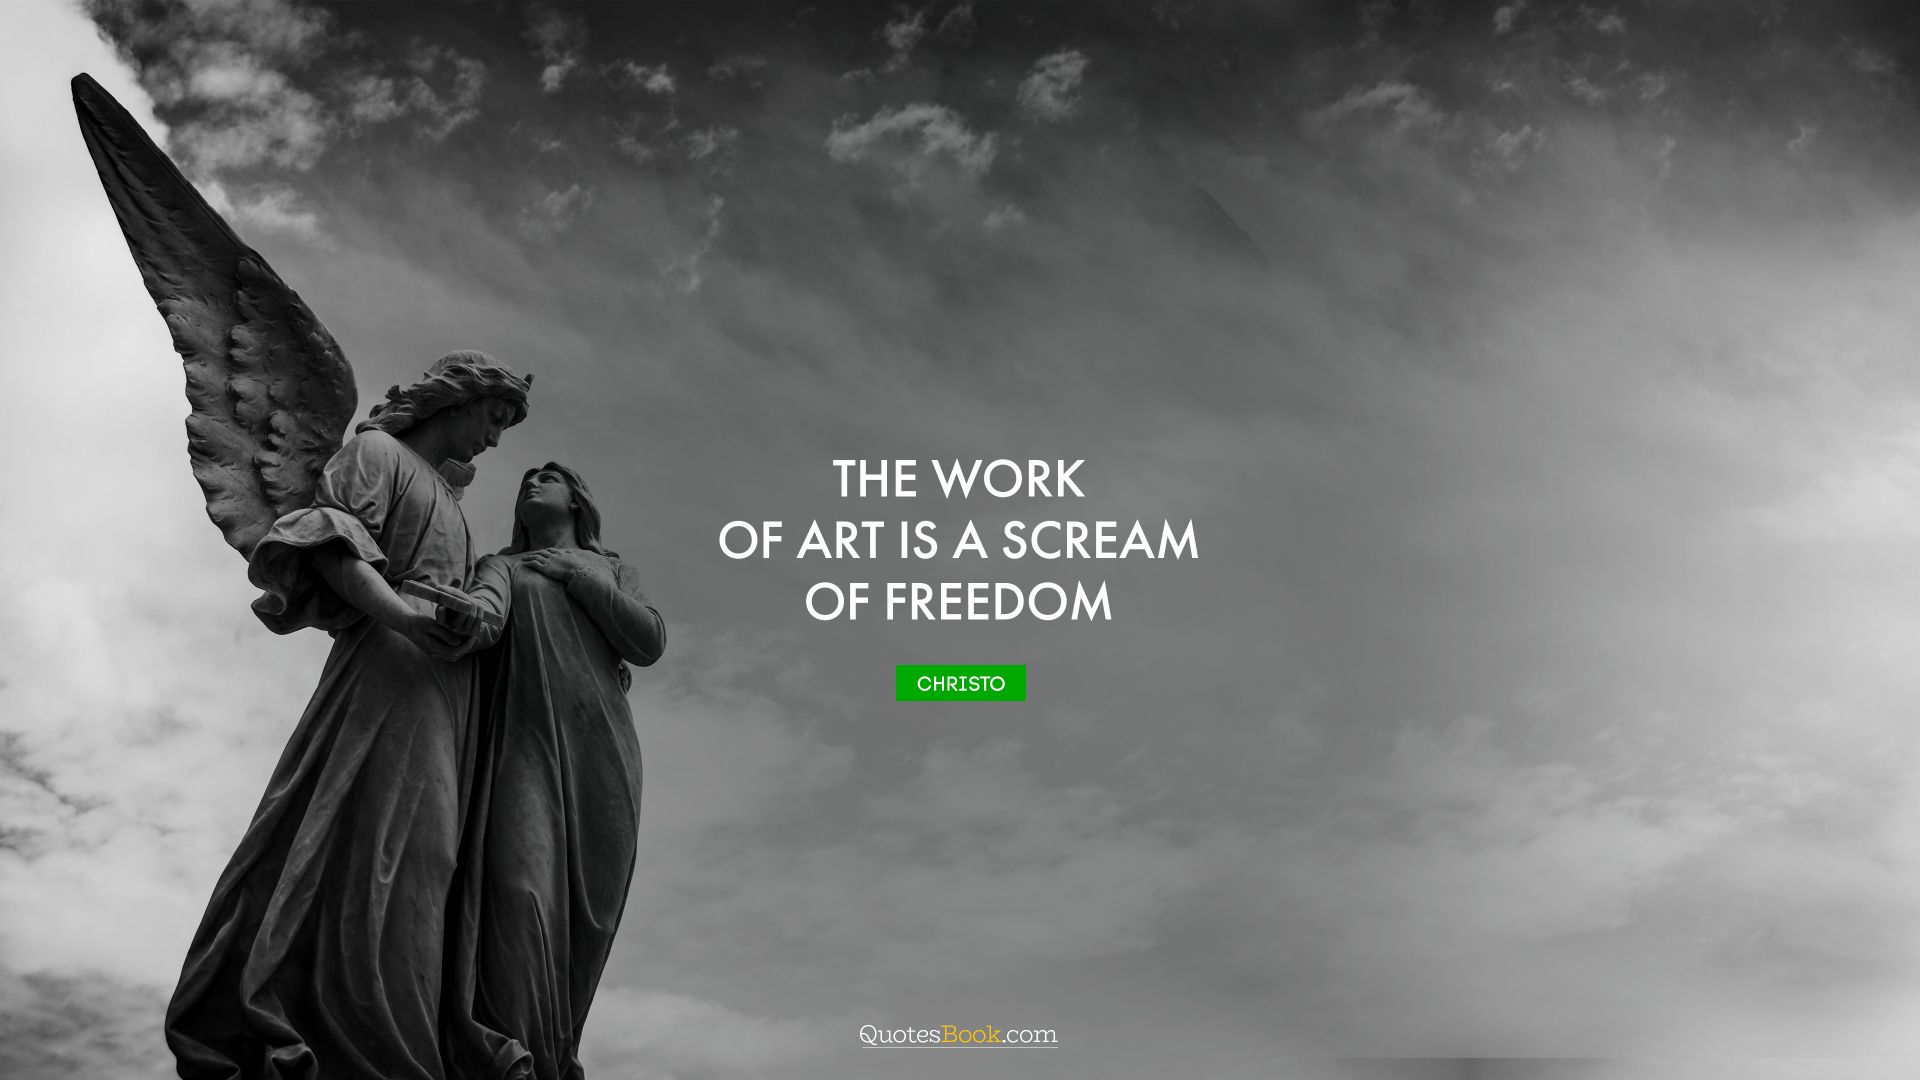 The work of art is a scream of freedom. - Quote by Christo